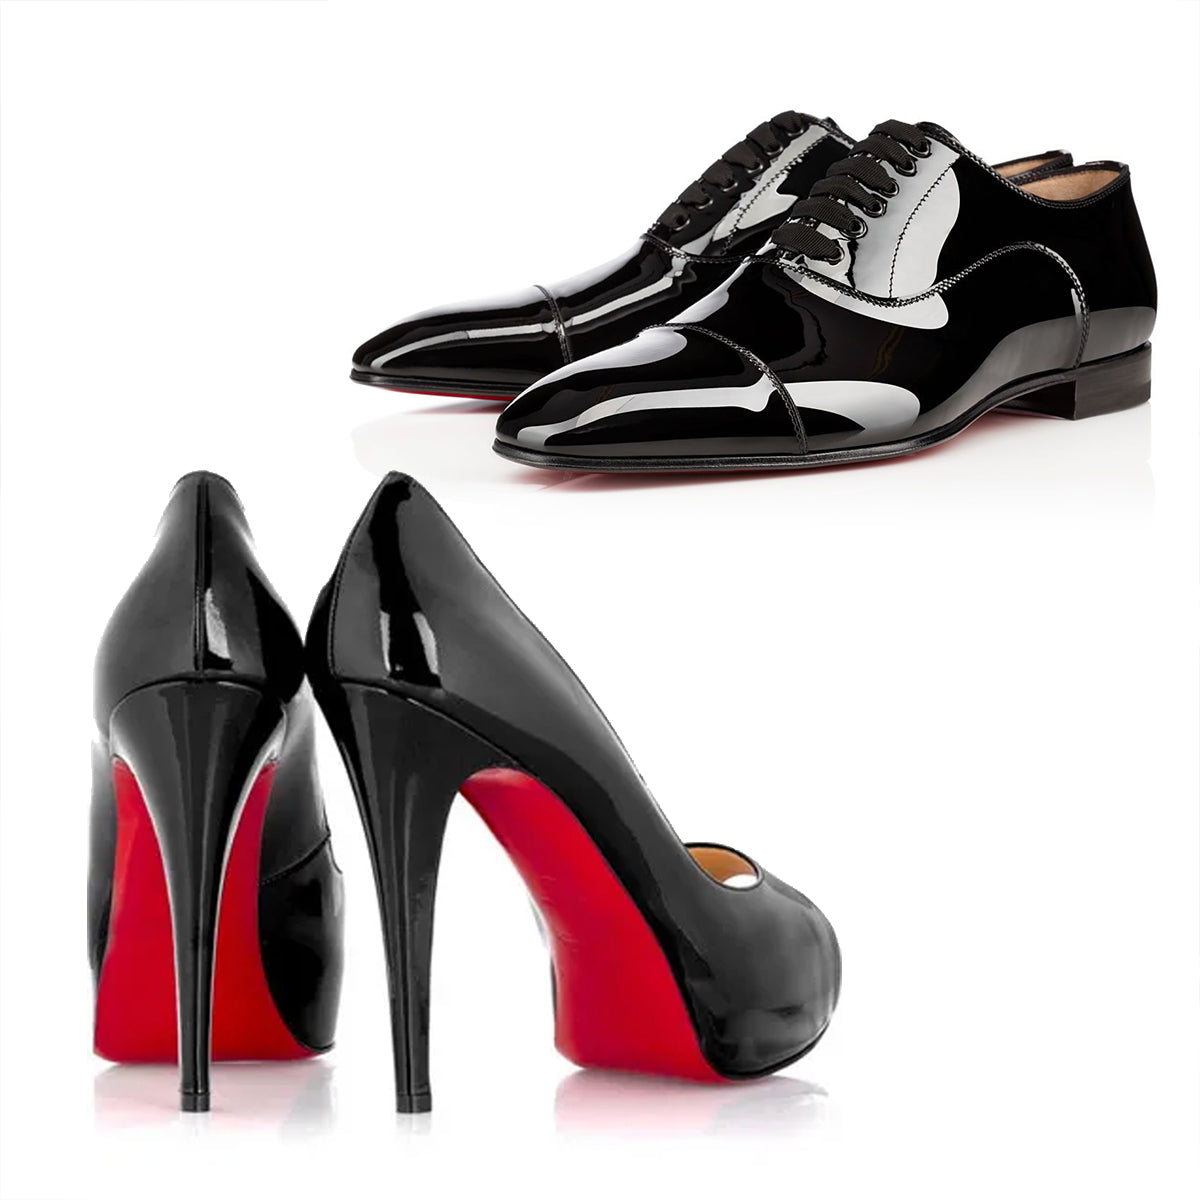 LOUBOUTIN SHOES / HEELS SERVICES WITH RETURN SHIPPING PRICE - £80+ Sneakers ER